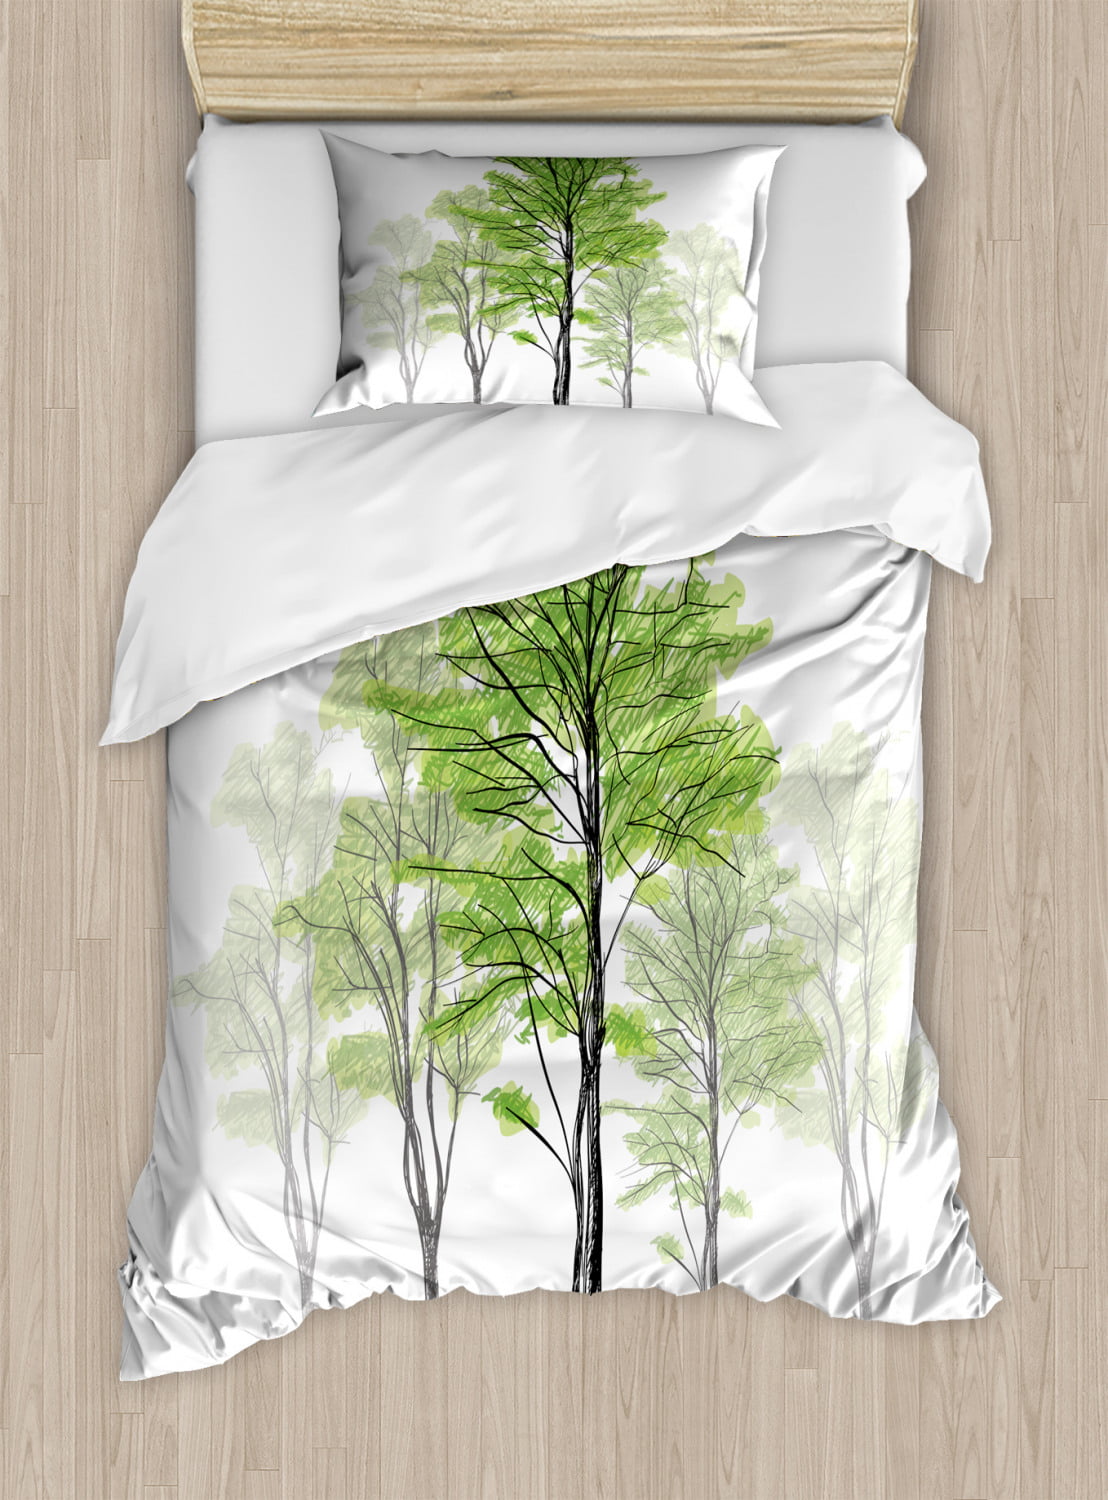 Forest Duvet Cover Set Sketch Style Tree With Green Leaves